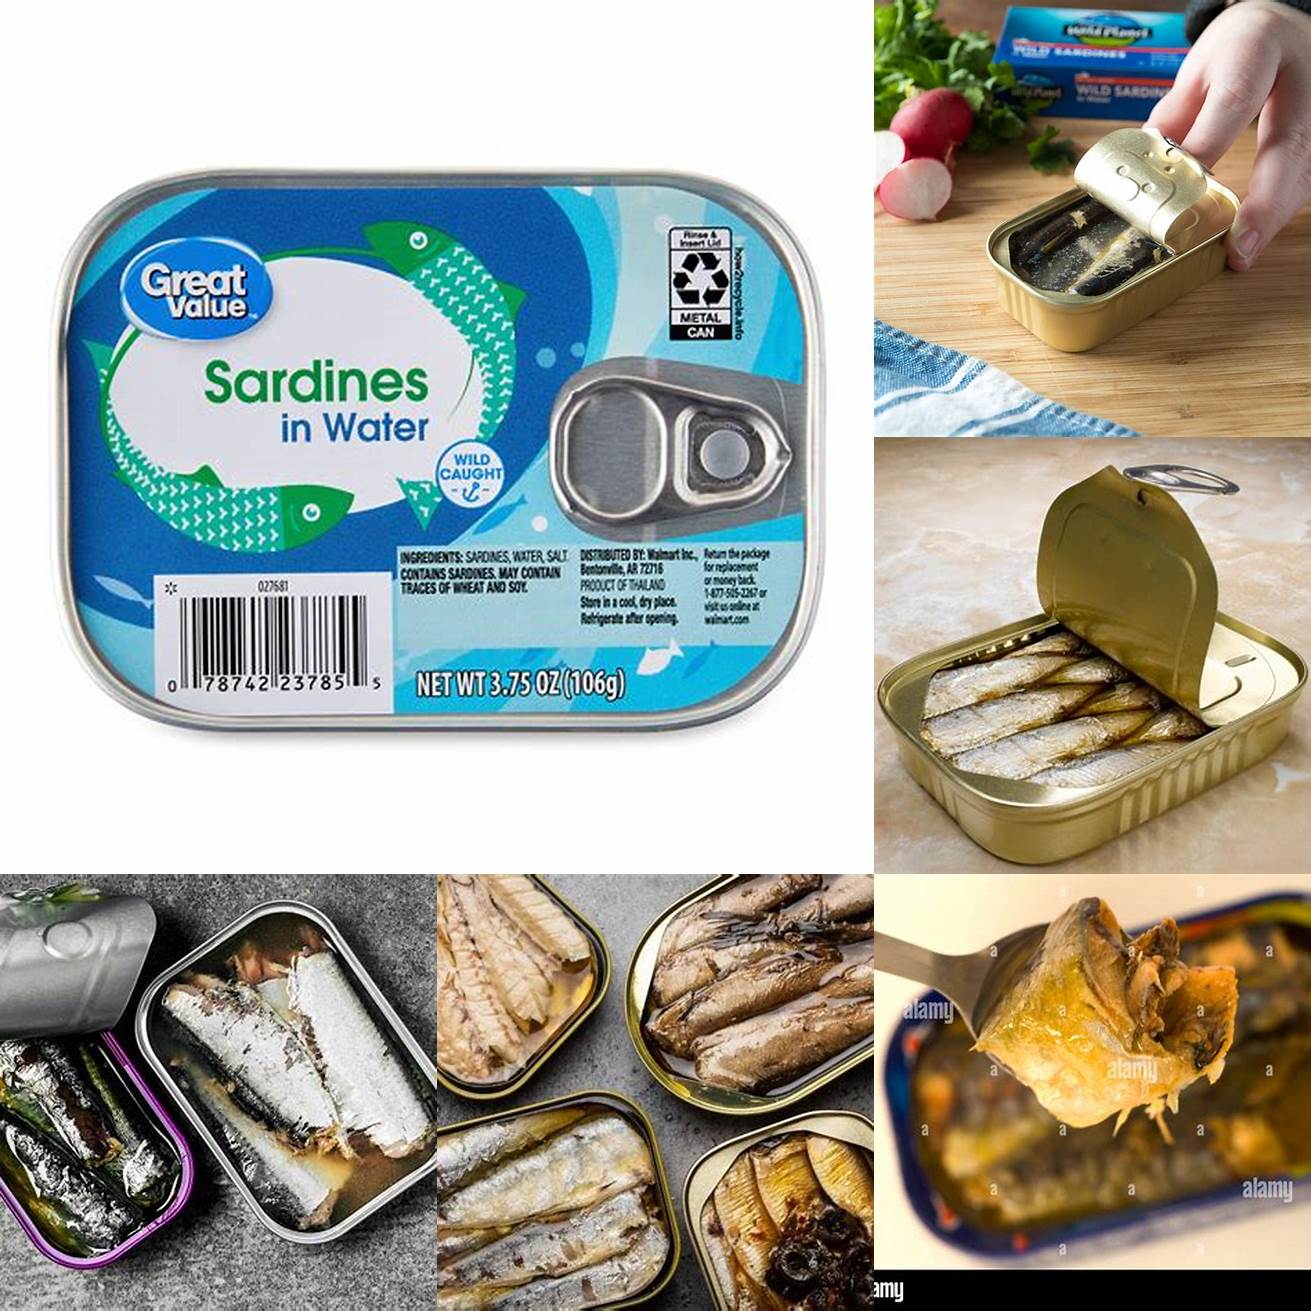 Canned sardines are a great source of omega-3 fatty acids which can improve your cats coat and skin health